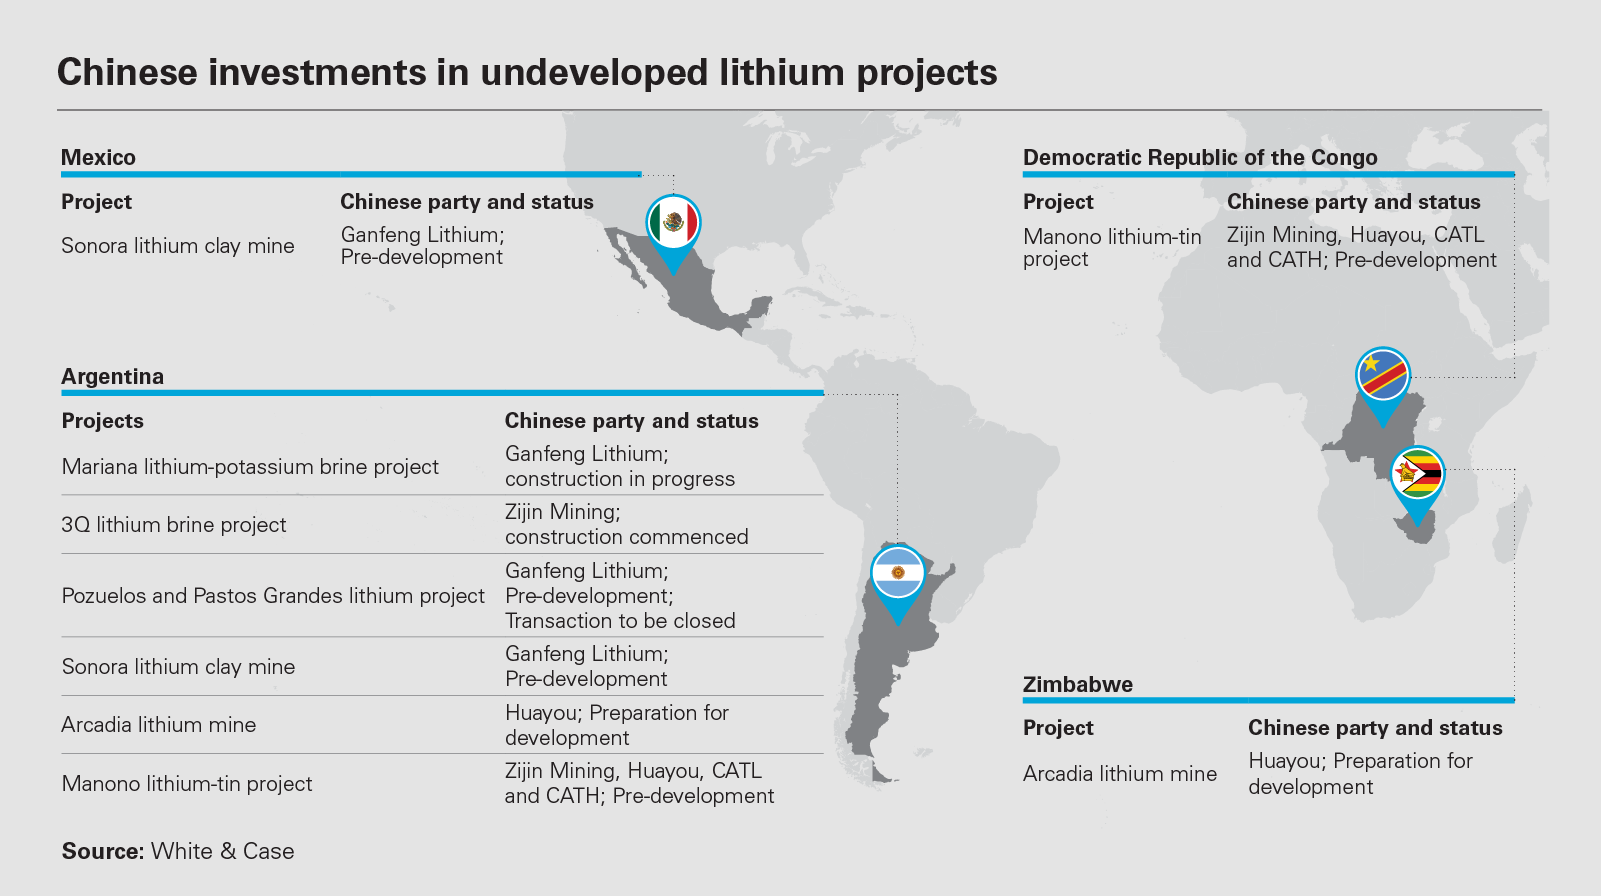 Chinese investments in undeveloped lithium projects